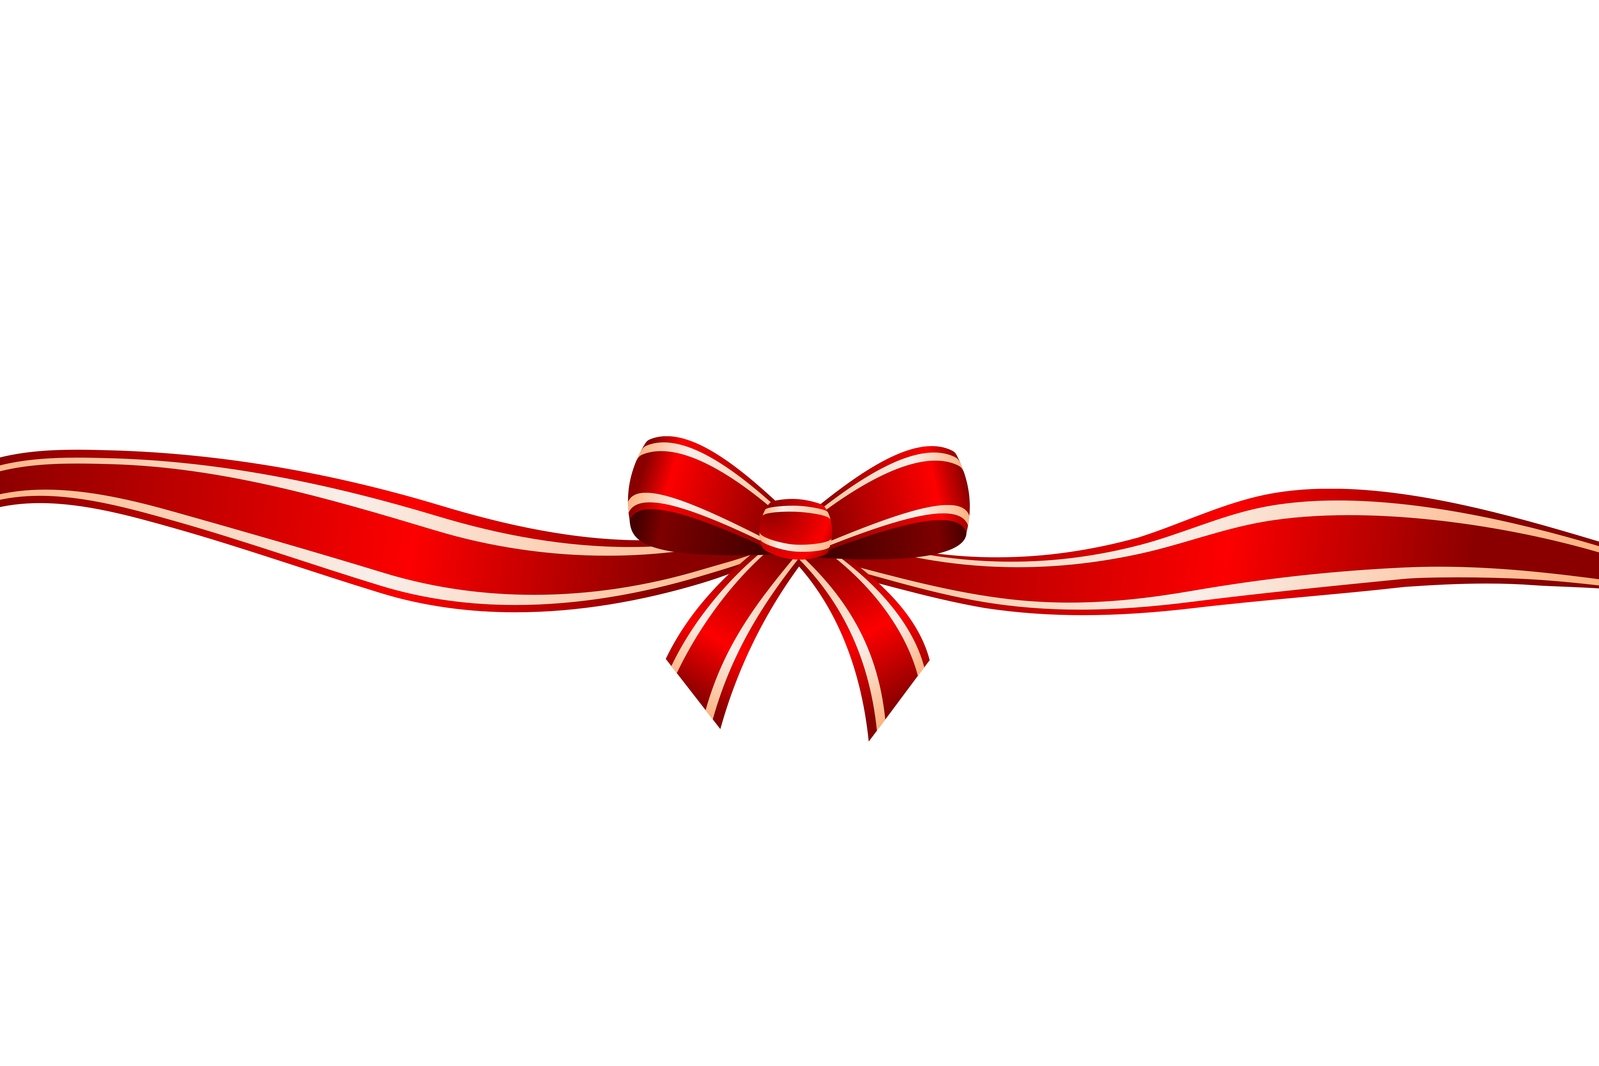 Christmas Ribbon Vector Images (over 180,000)